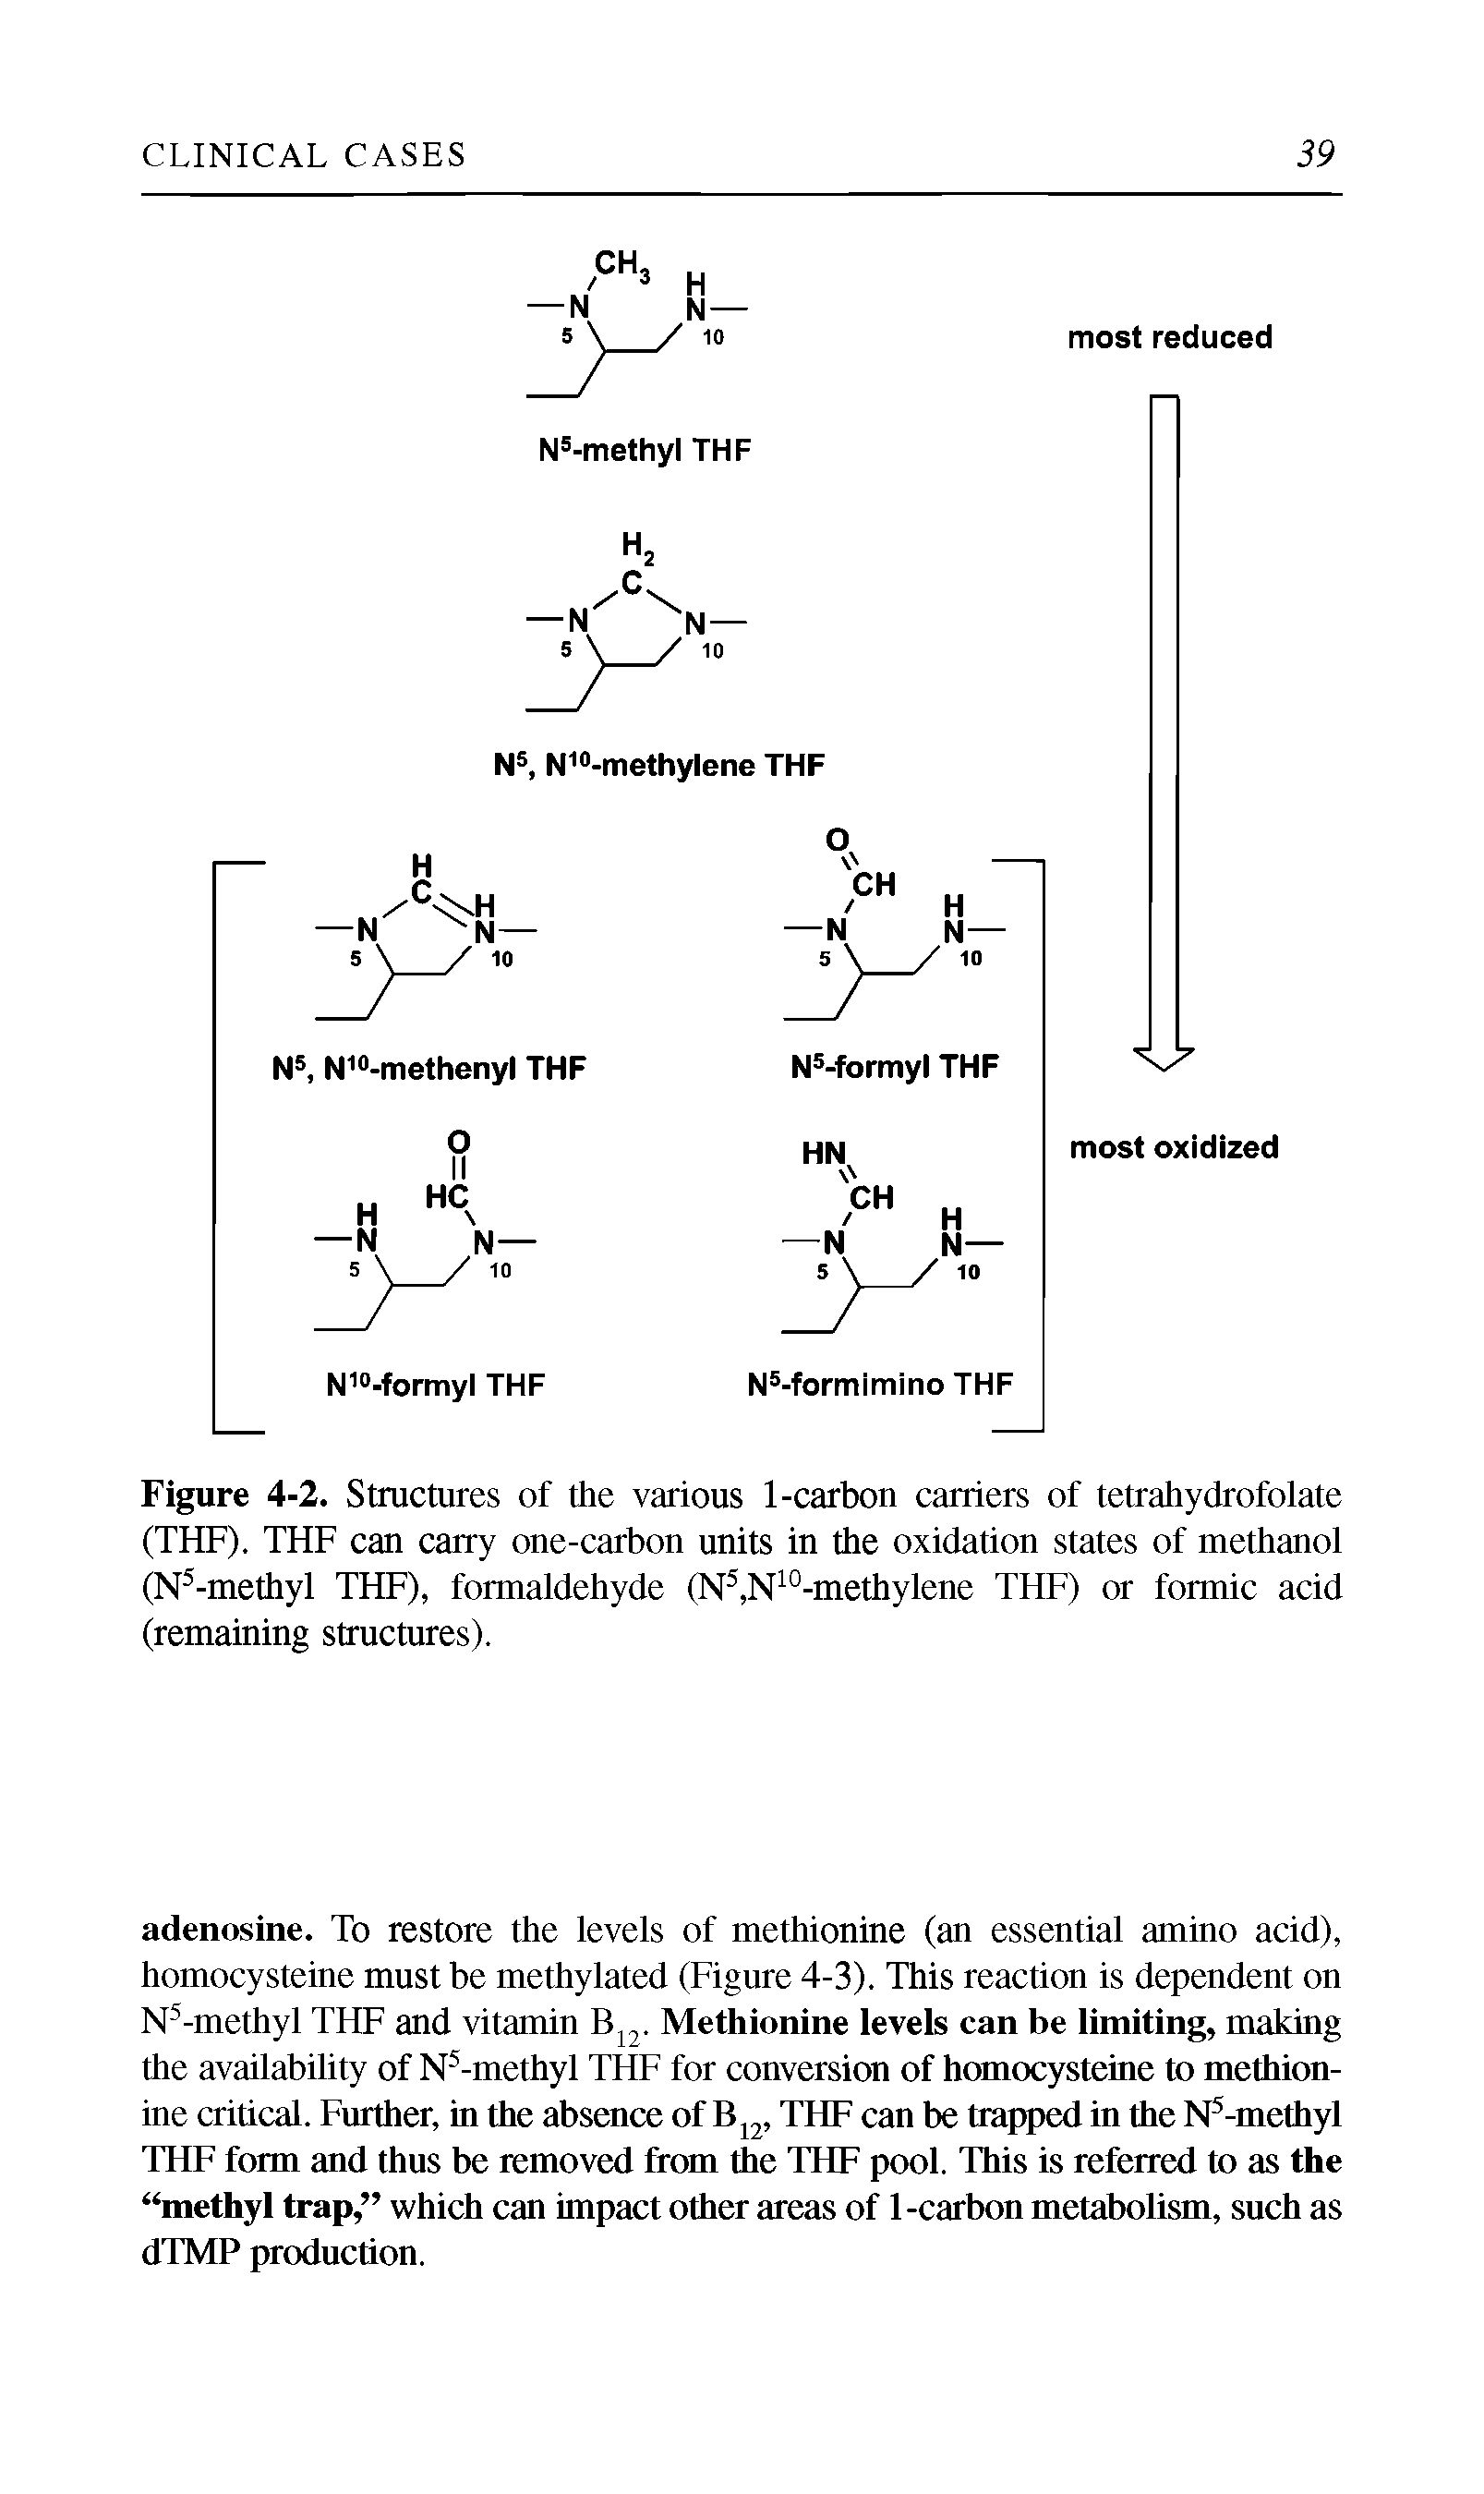 Figure 4-2. Structures of the various 1-carbon carriers of tetrahydrofolate (THF). THF can carry one-carbon units in the oxidation states of methanol (N -methyl THF), formaldehyde (N, N °-methylene THF) or formic acid (remaining structures).